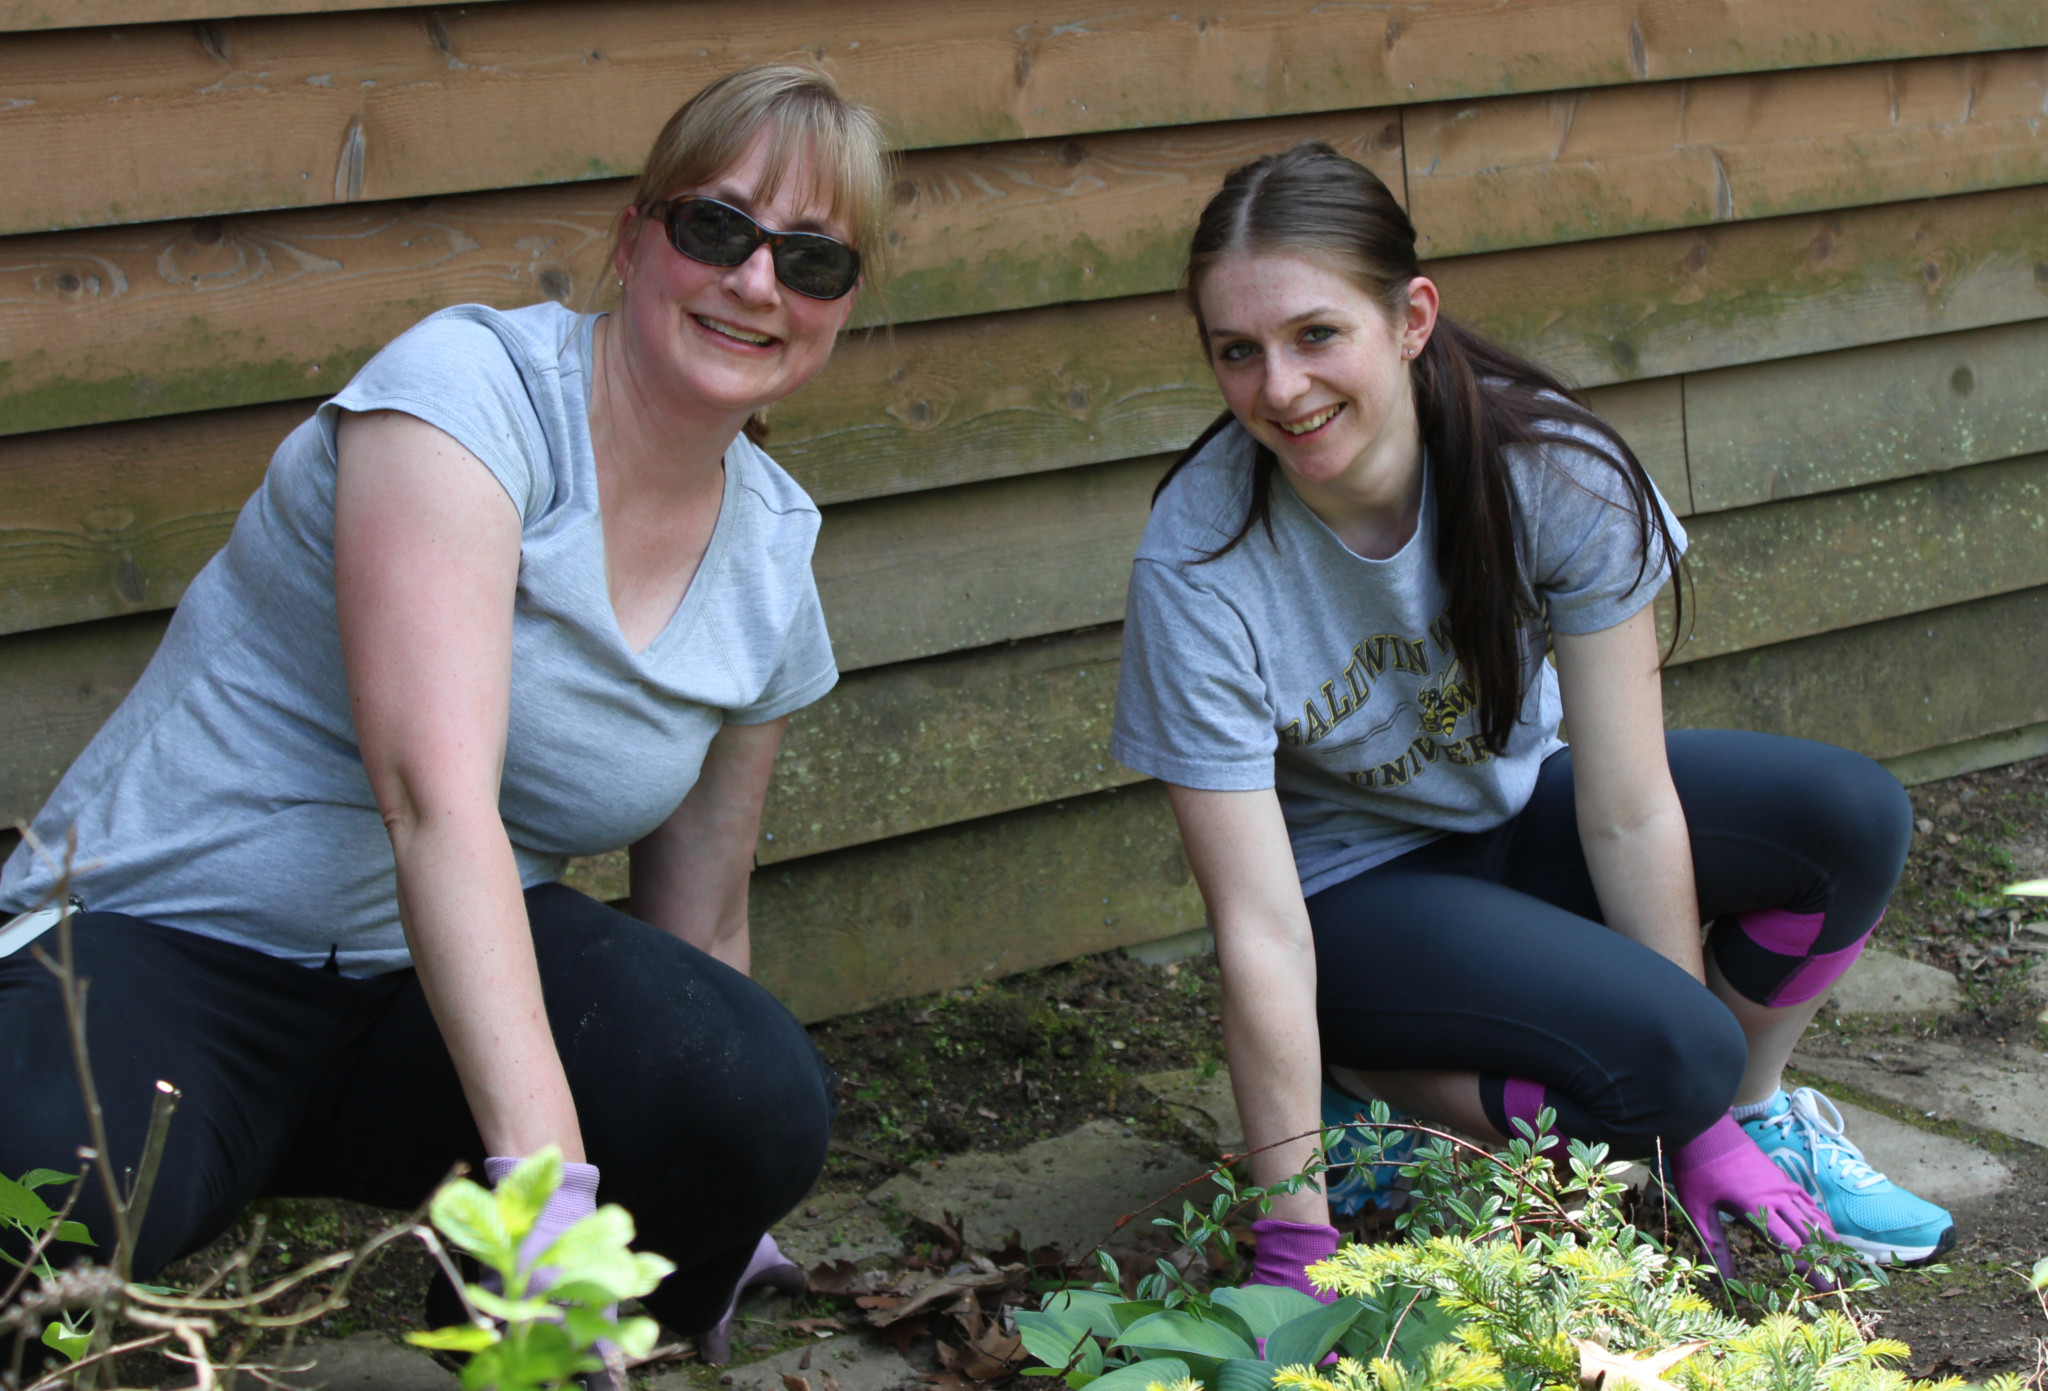 Christine and Gwyn working hard on the landscaping on Community Service Day.